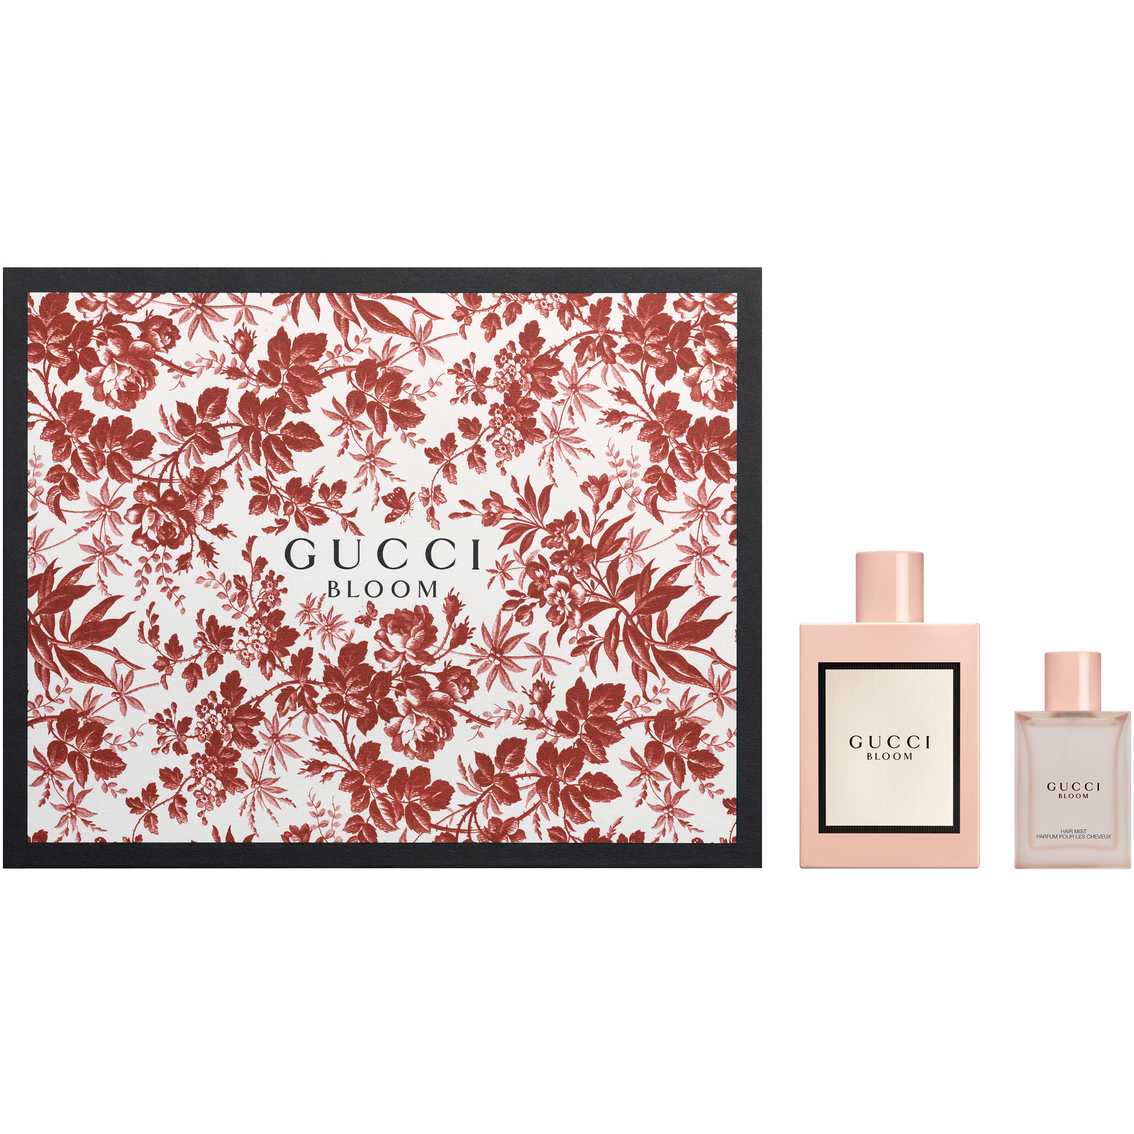 Gucci Bloom Gift Set | Gifts Sets For 